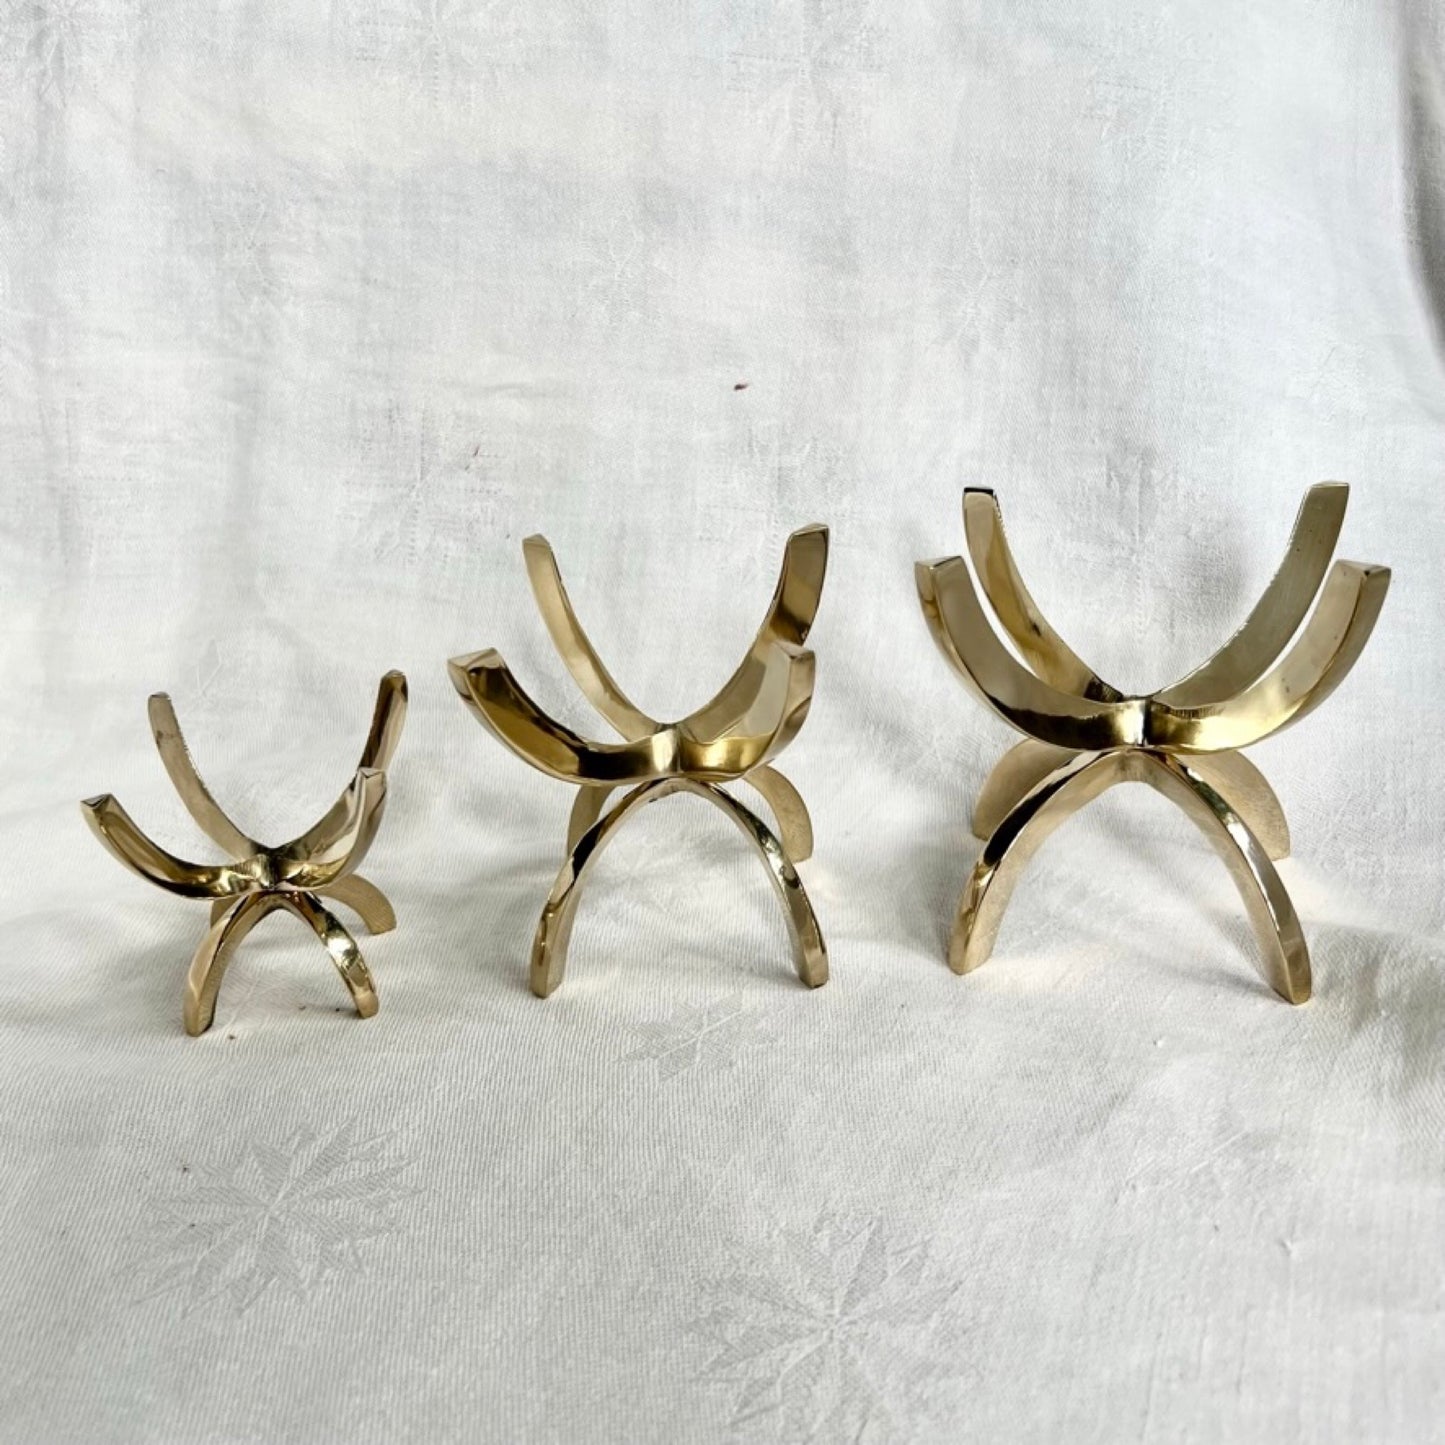 Three brass claw mineral stands size comparison